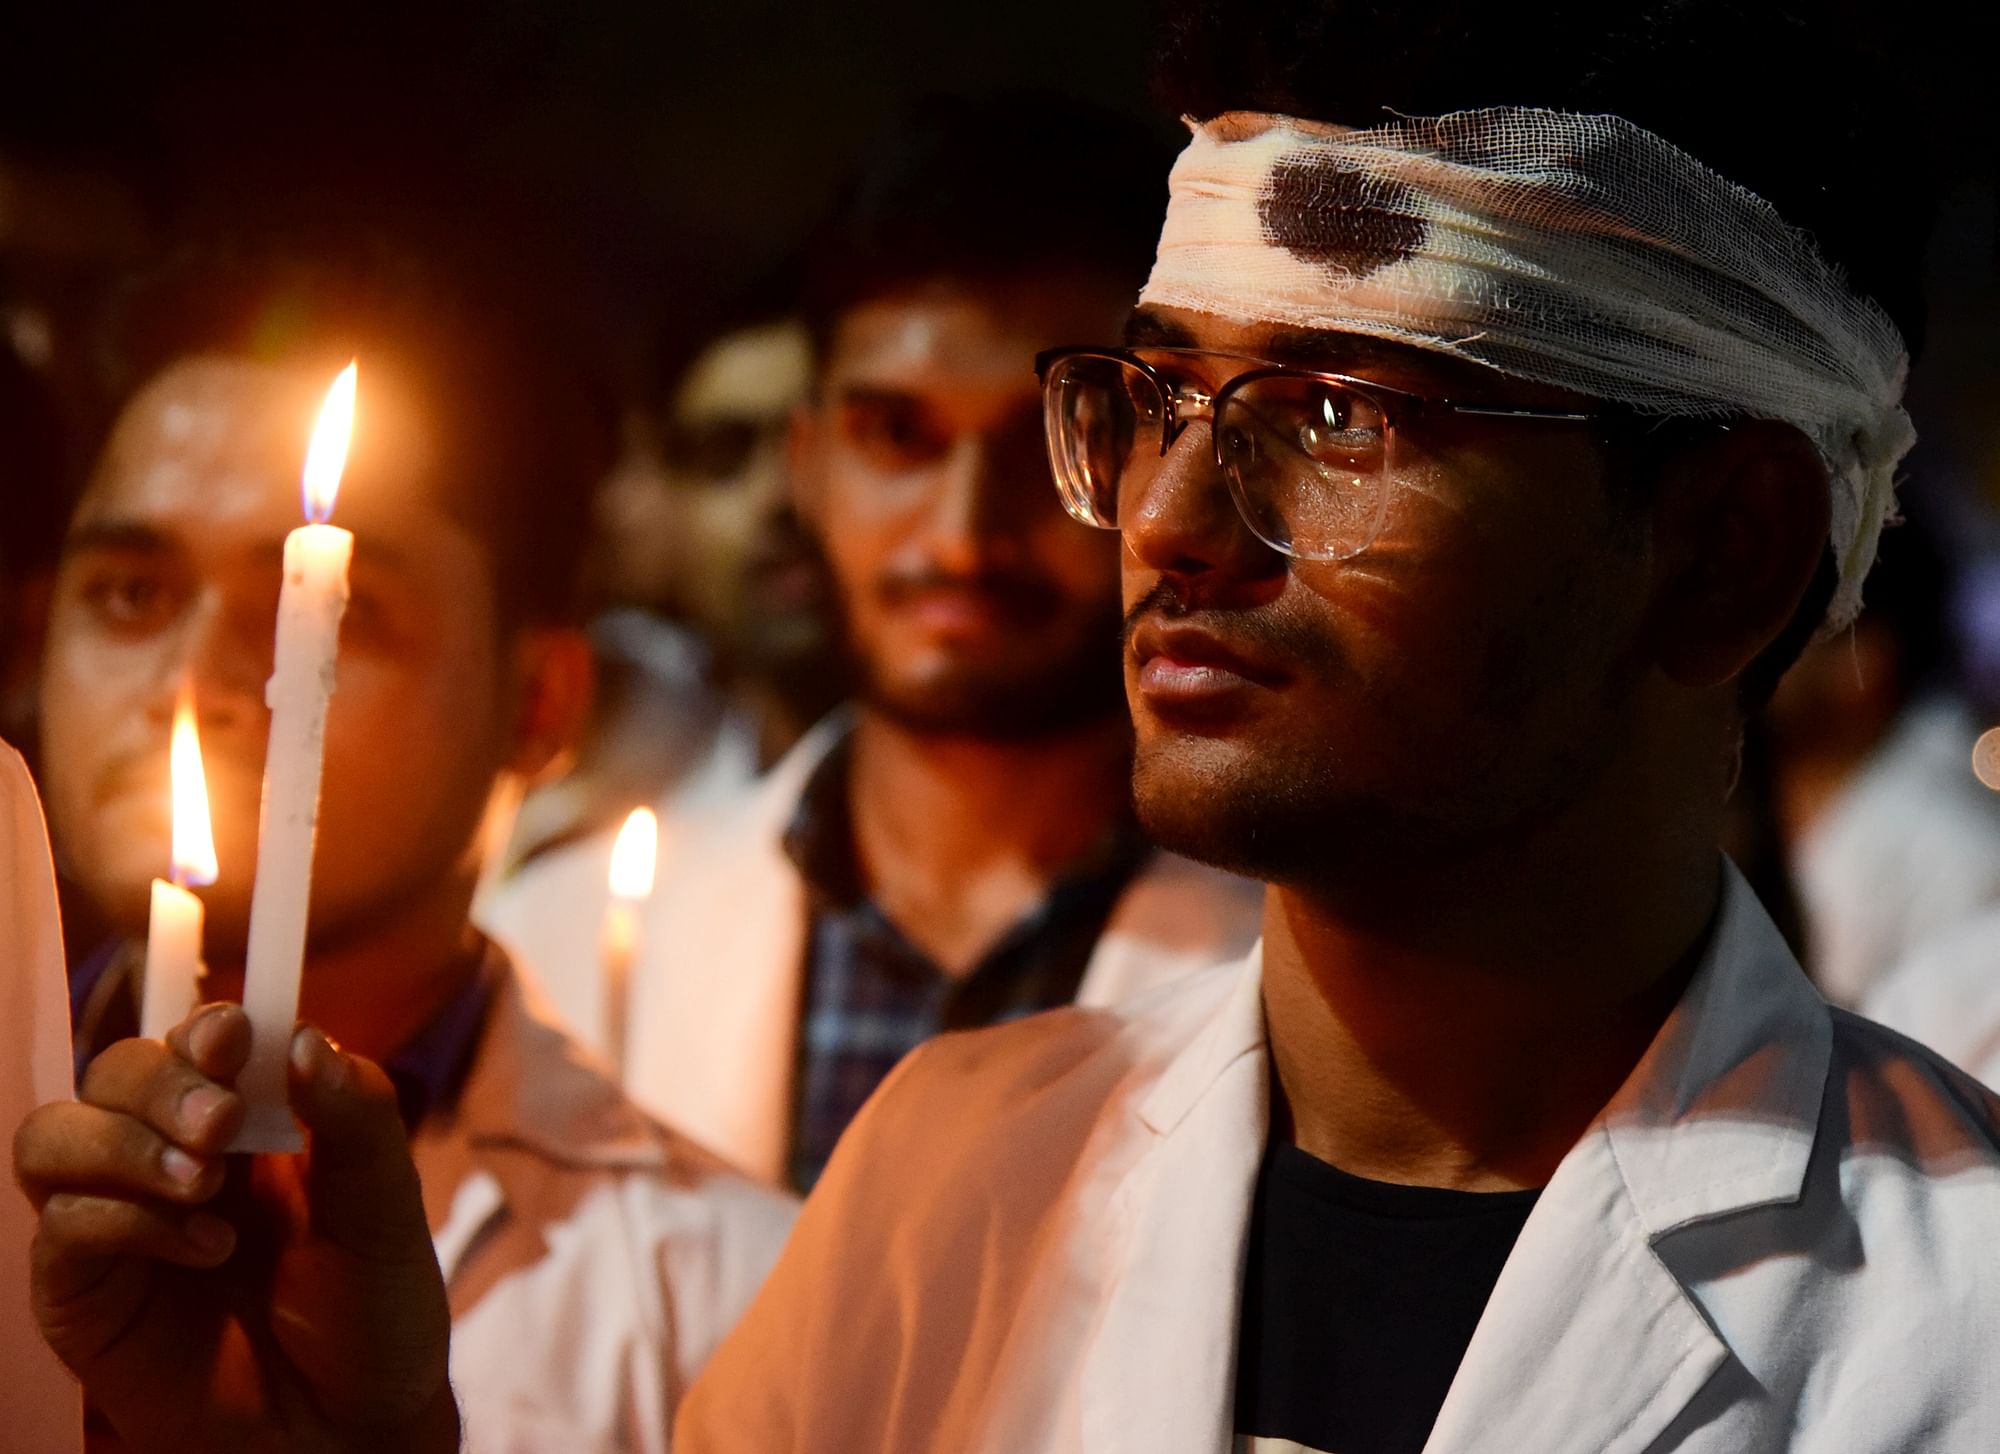 The COVID-19 coronavirus pandemic has thrown into sharp relief the vulnerabilities of the Indian doctors. The Indian Medical Association has written to Prime Minister Narendra Modi seeking his intervention.